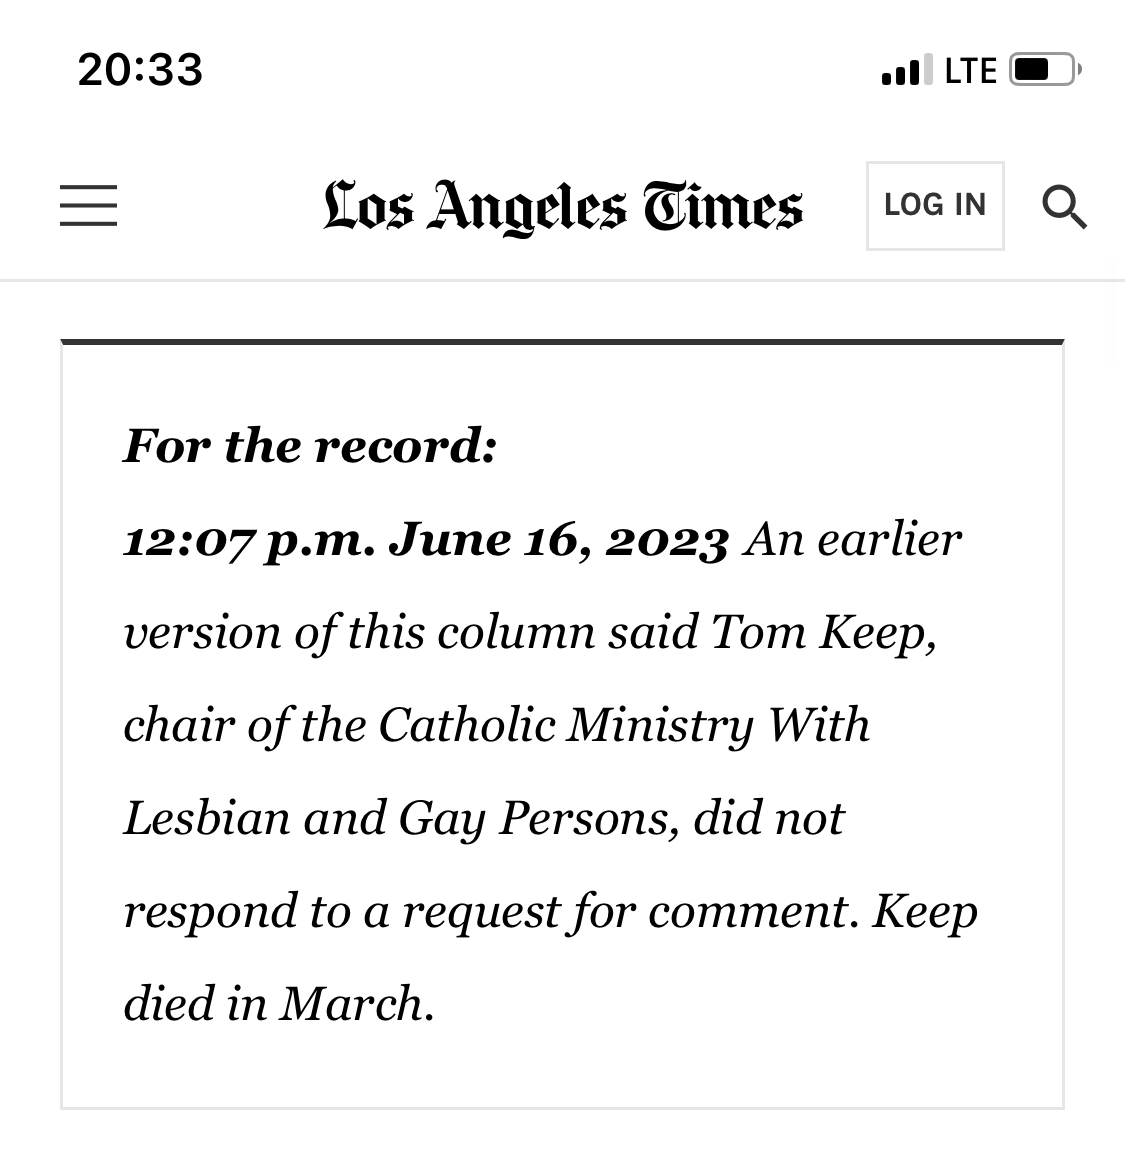 An earlier version of this column said Tom Keep, chair of the Catholic Ministry With Lesbian and Gay Persons, did not respond to a request for comment. Keep died in March.